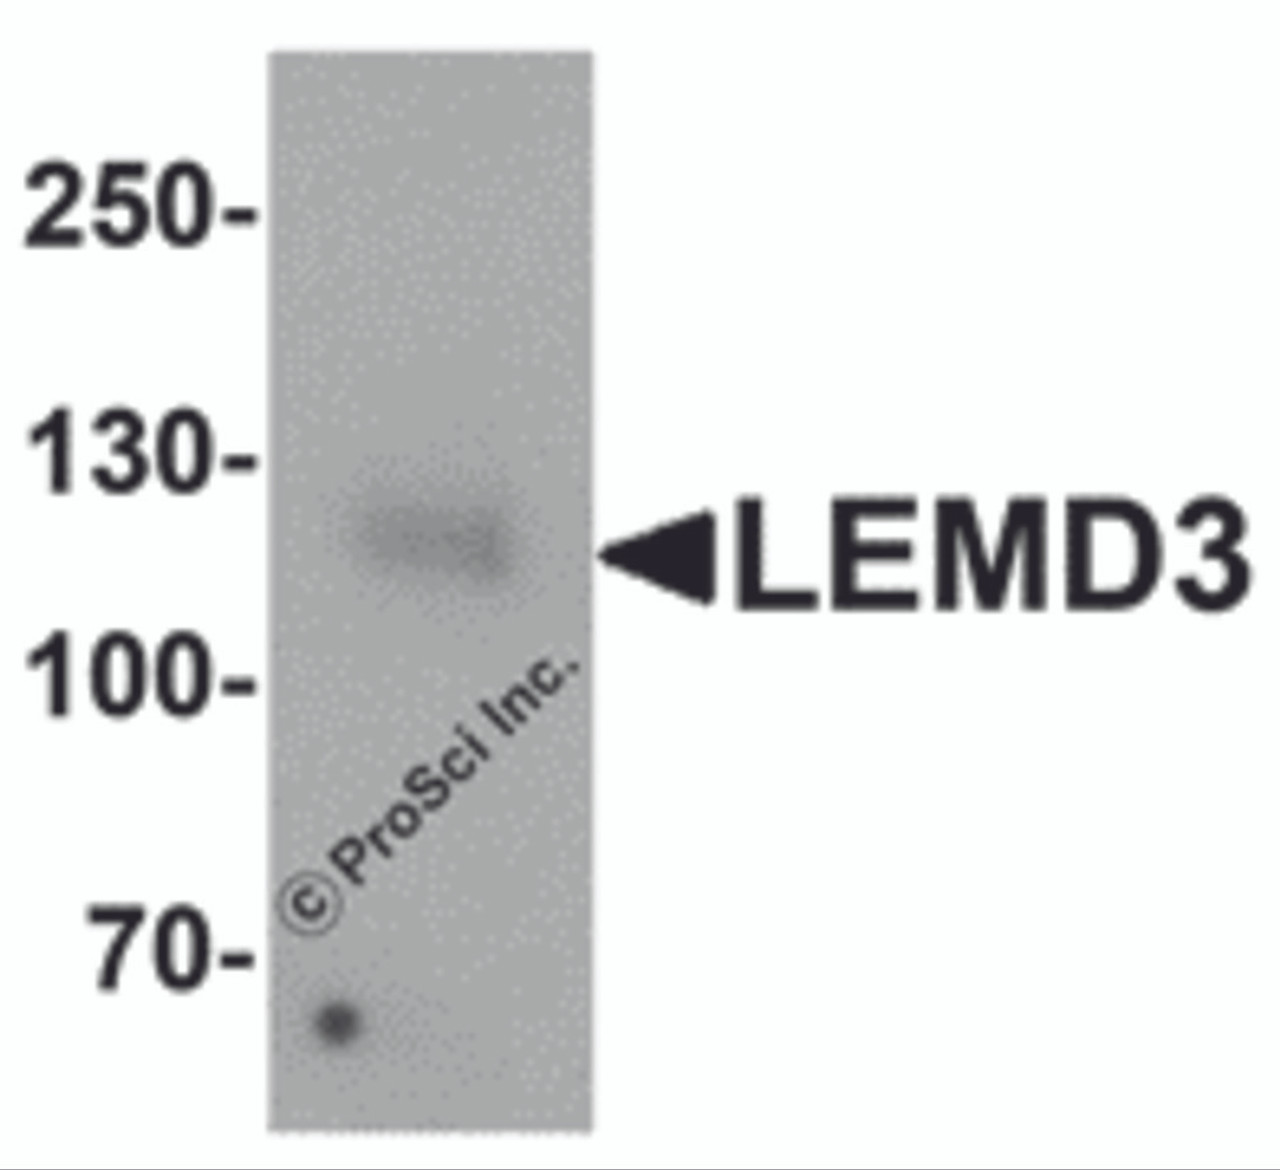 Western blot analysis of LEMD3 in human colon tissue lysate with LEMD3 antibody at 1 &#956;g/mL.